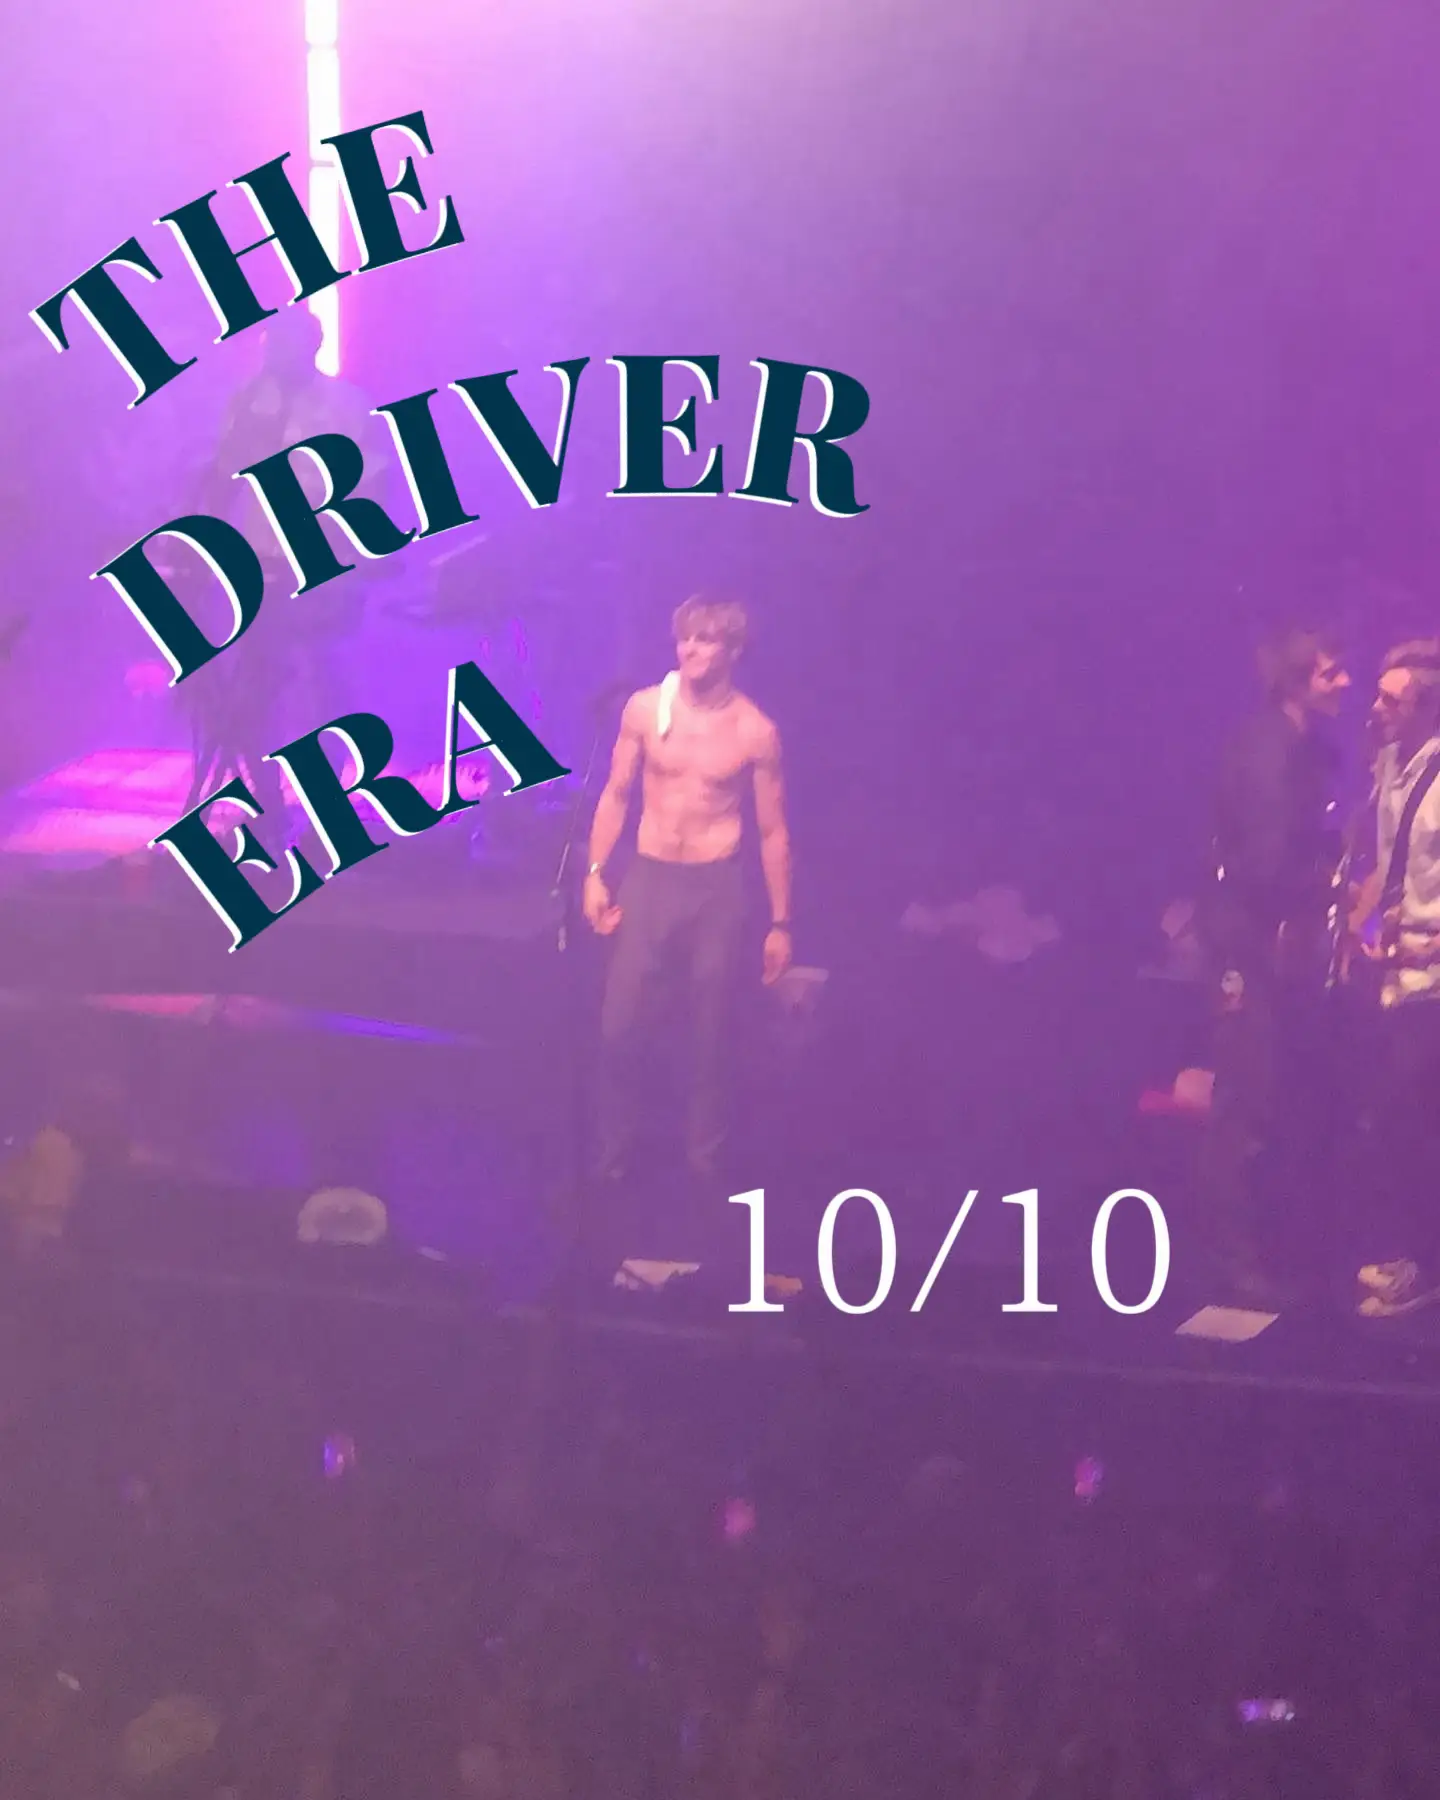  A picture of a band with the words "The Driver Era" written on it.